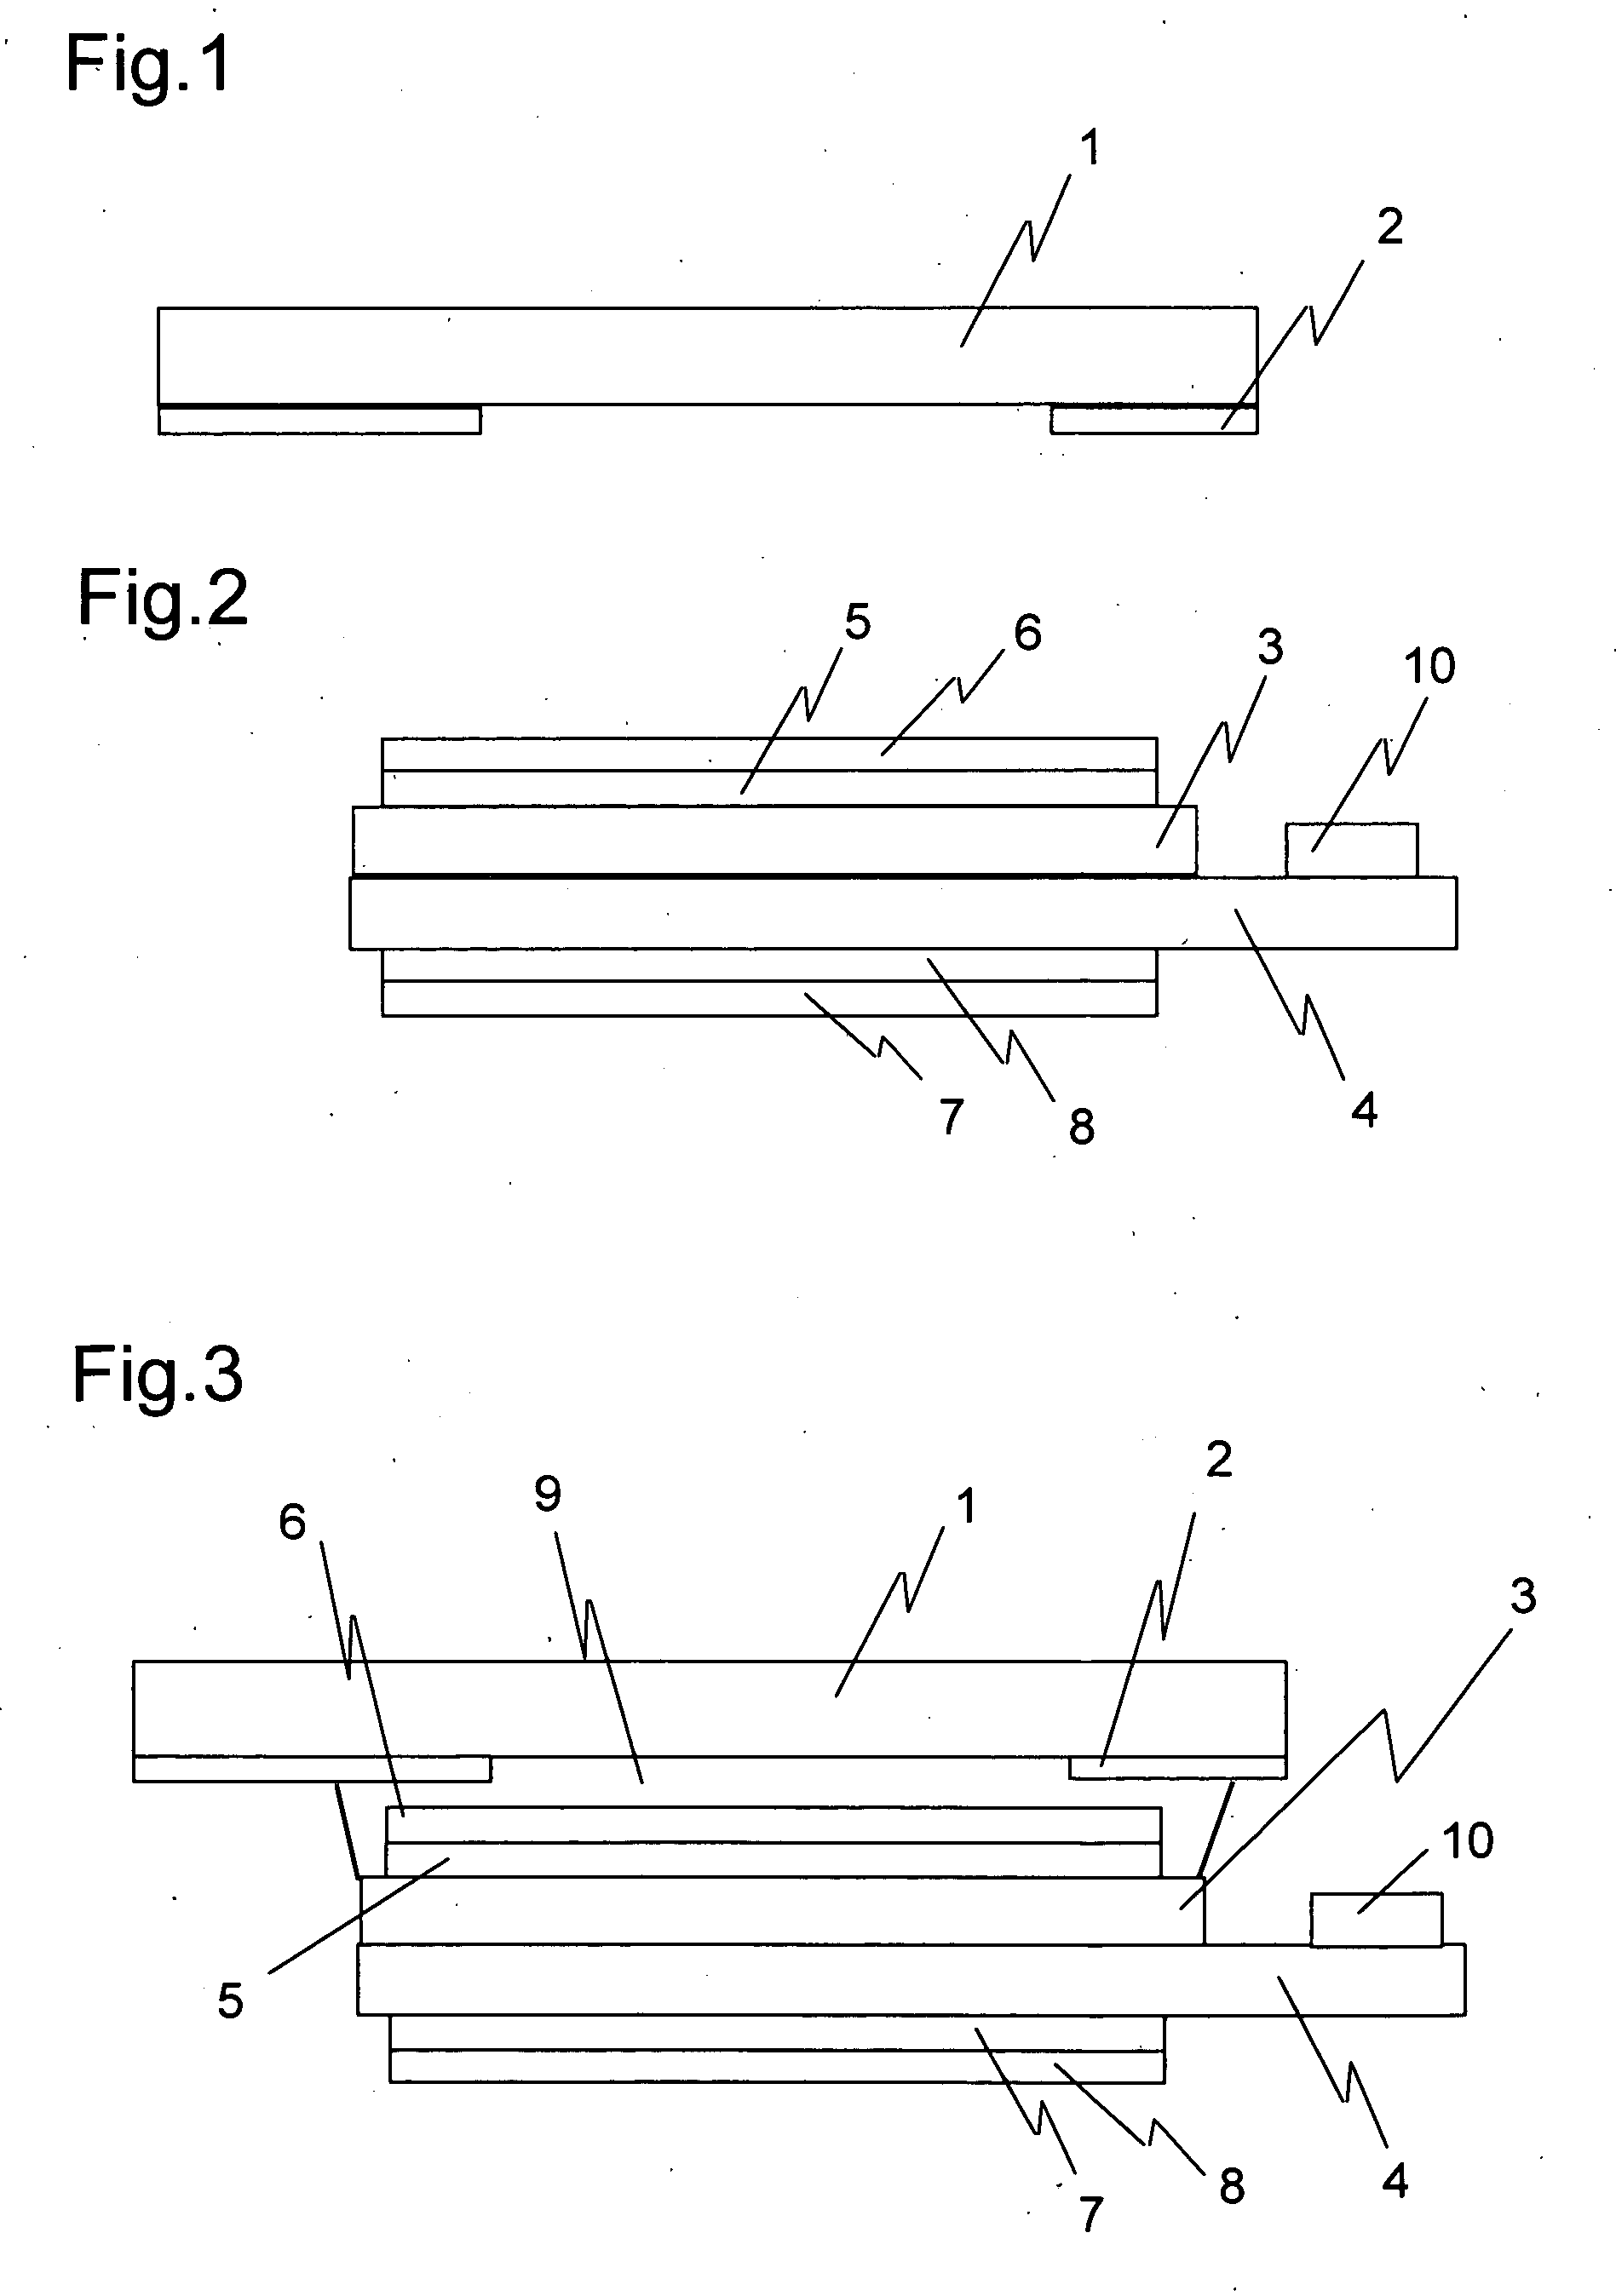 Display Apparatus and Method of Manufacturing a Display Apparatus